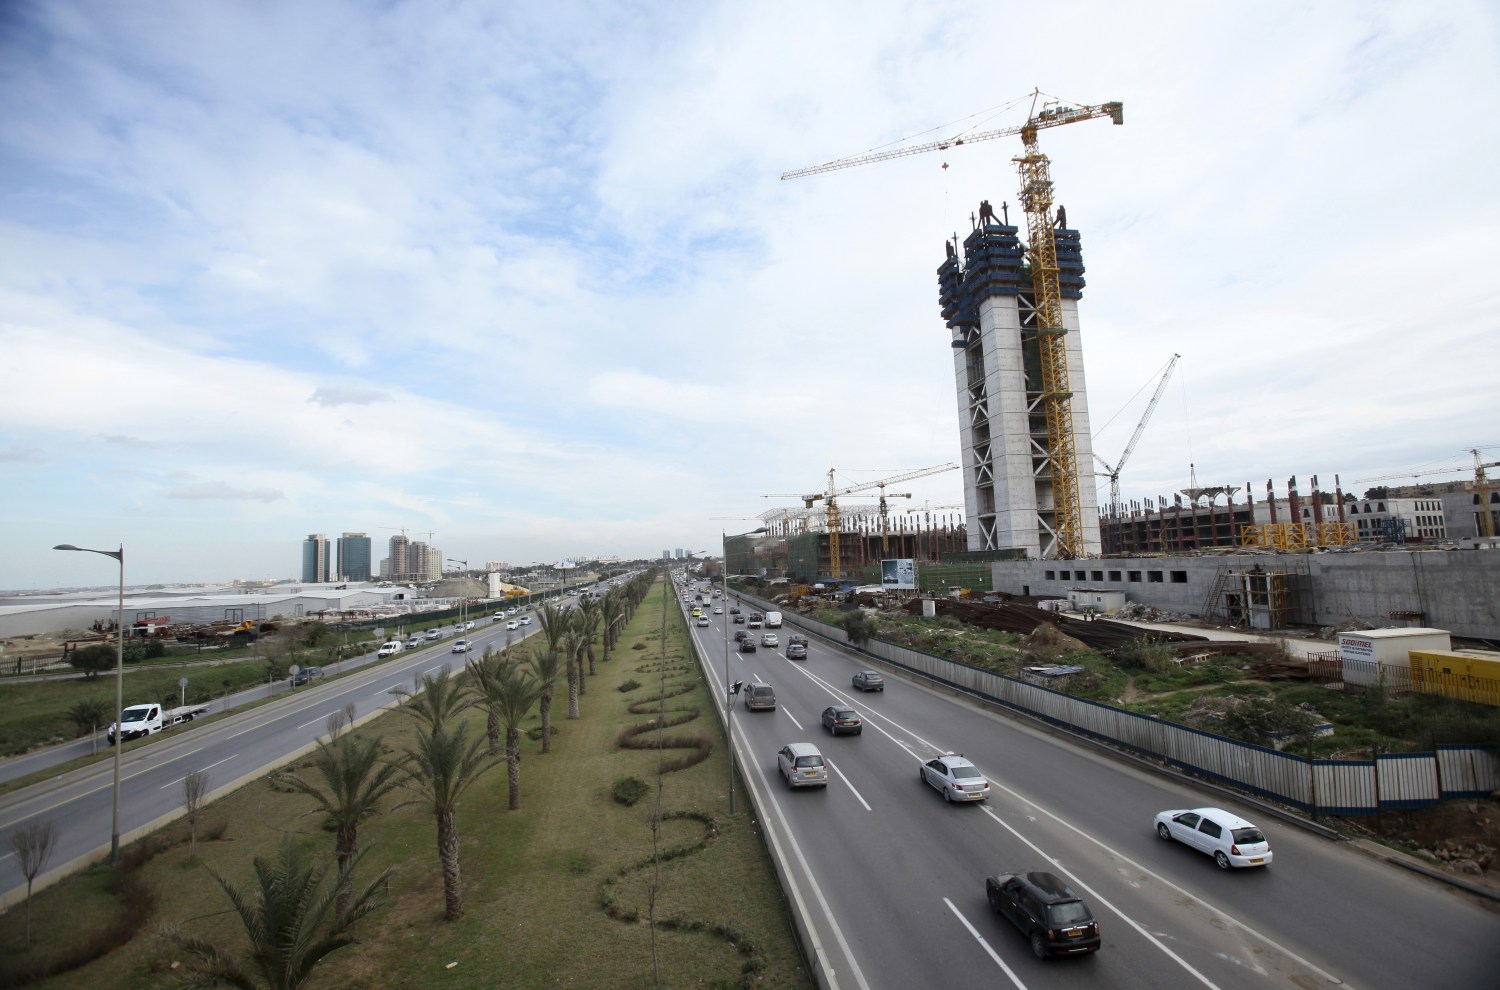 Vehicles pass by on a road near the construction site of the new Great Mosque, which is being built by the China State Construction Engineering Corporation (CSCEC), in Algiers, Algeria January 20, 2016. Algeria is turning to China for external financing for several infrastructure projects including a new $3.2 billion port as the North African OPEC state looks to weather the collapse in global oil prices. REUTERS/Ramzi Boudina - GF20000101188